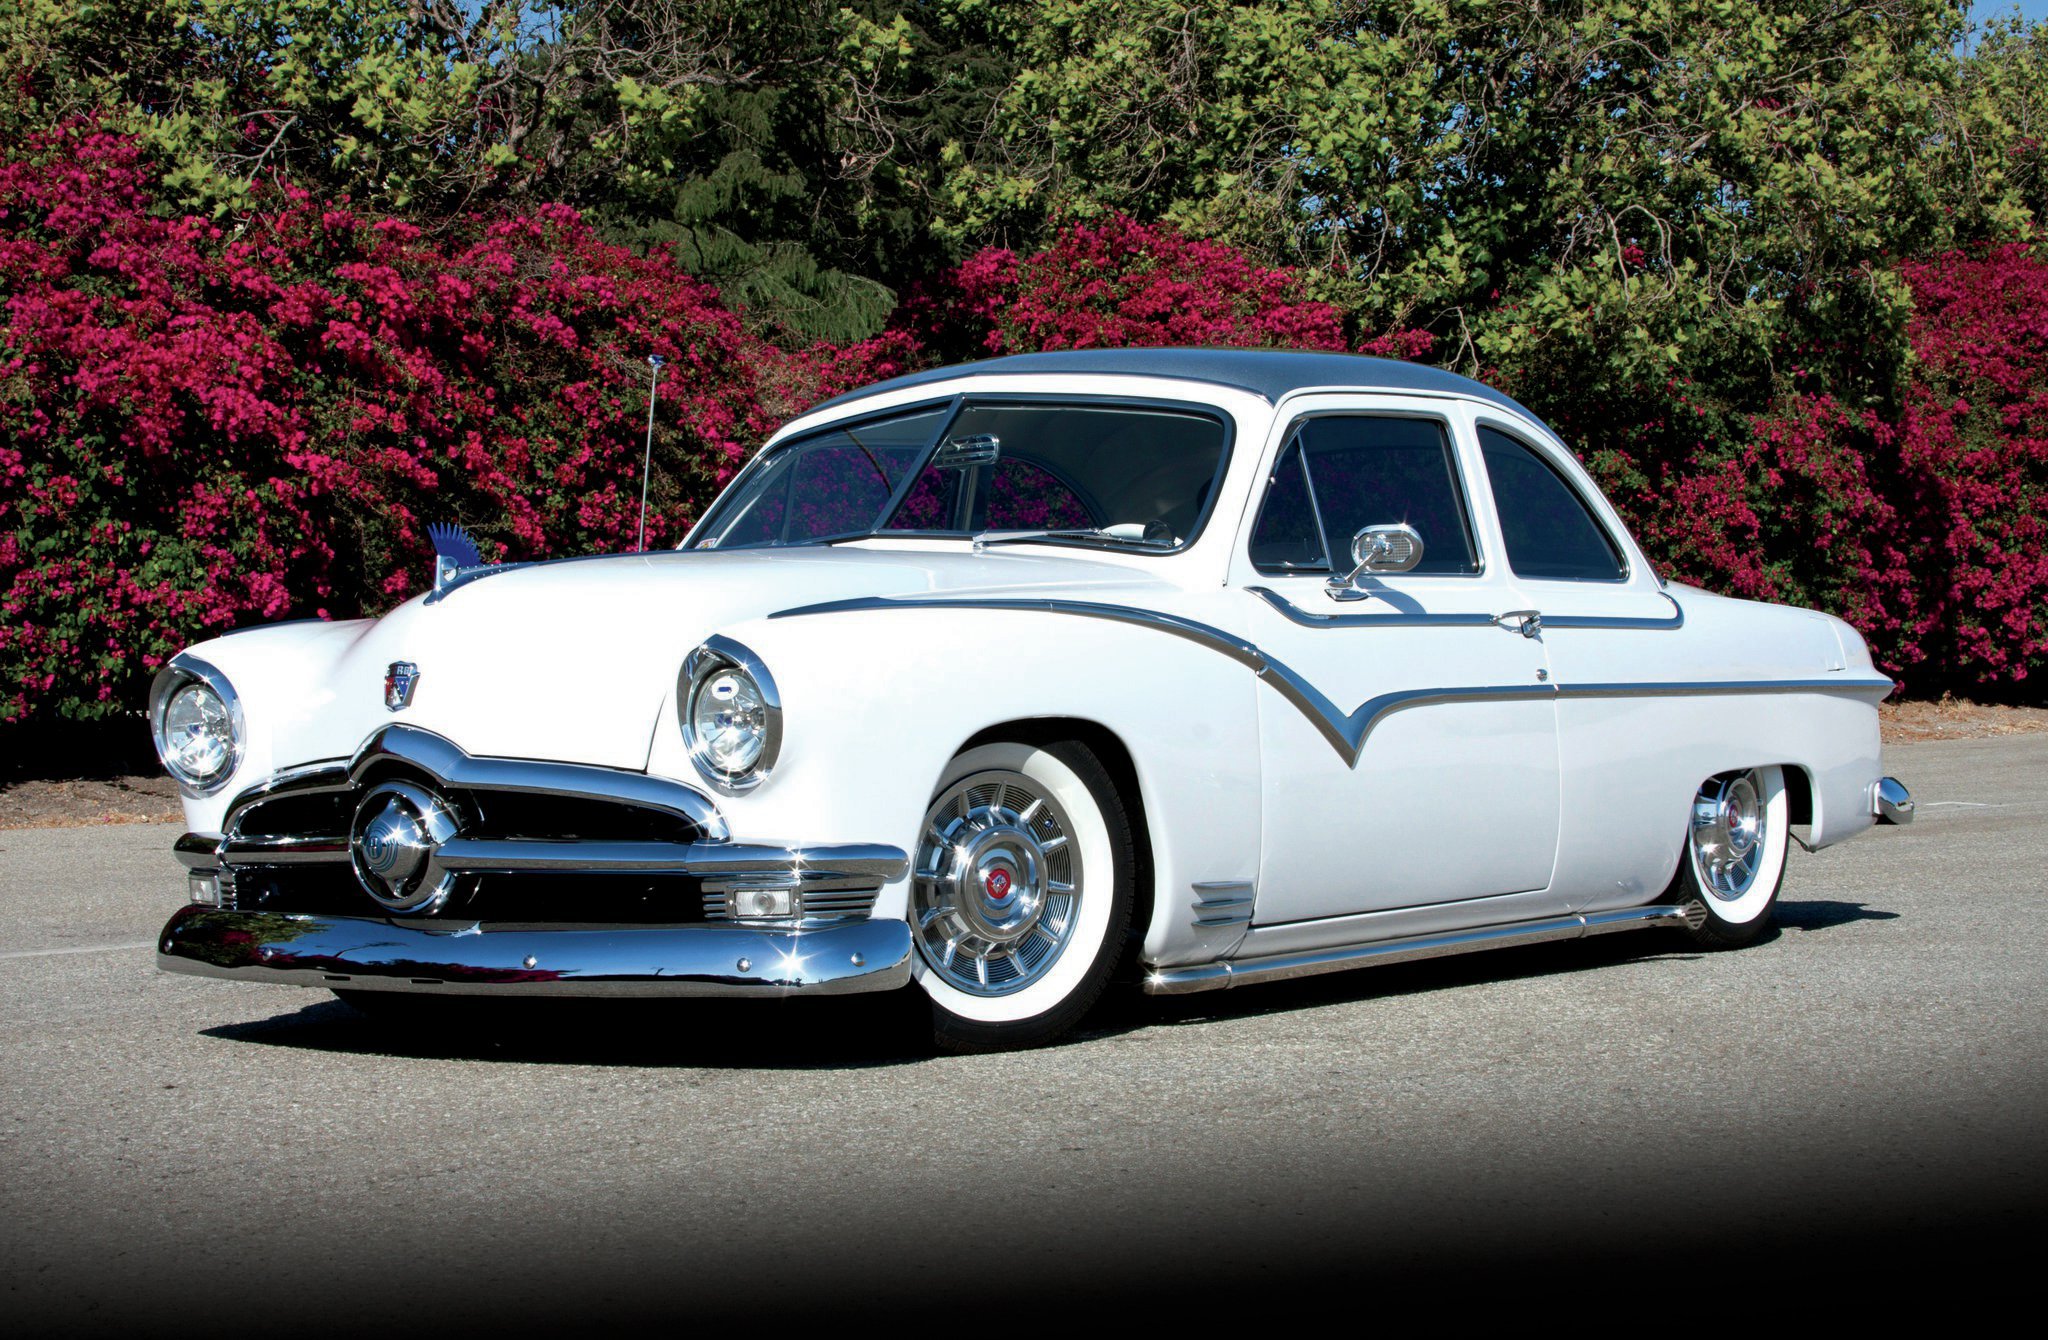 1950 Ford Coupe - '50 & Counting - Hot Rod Network